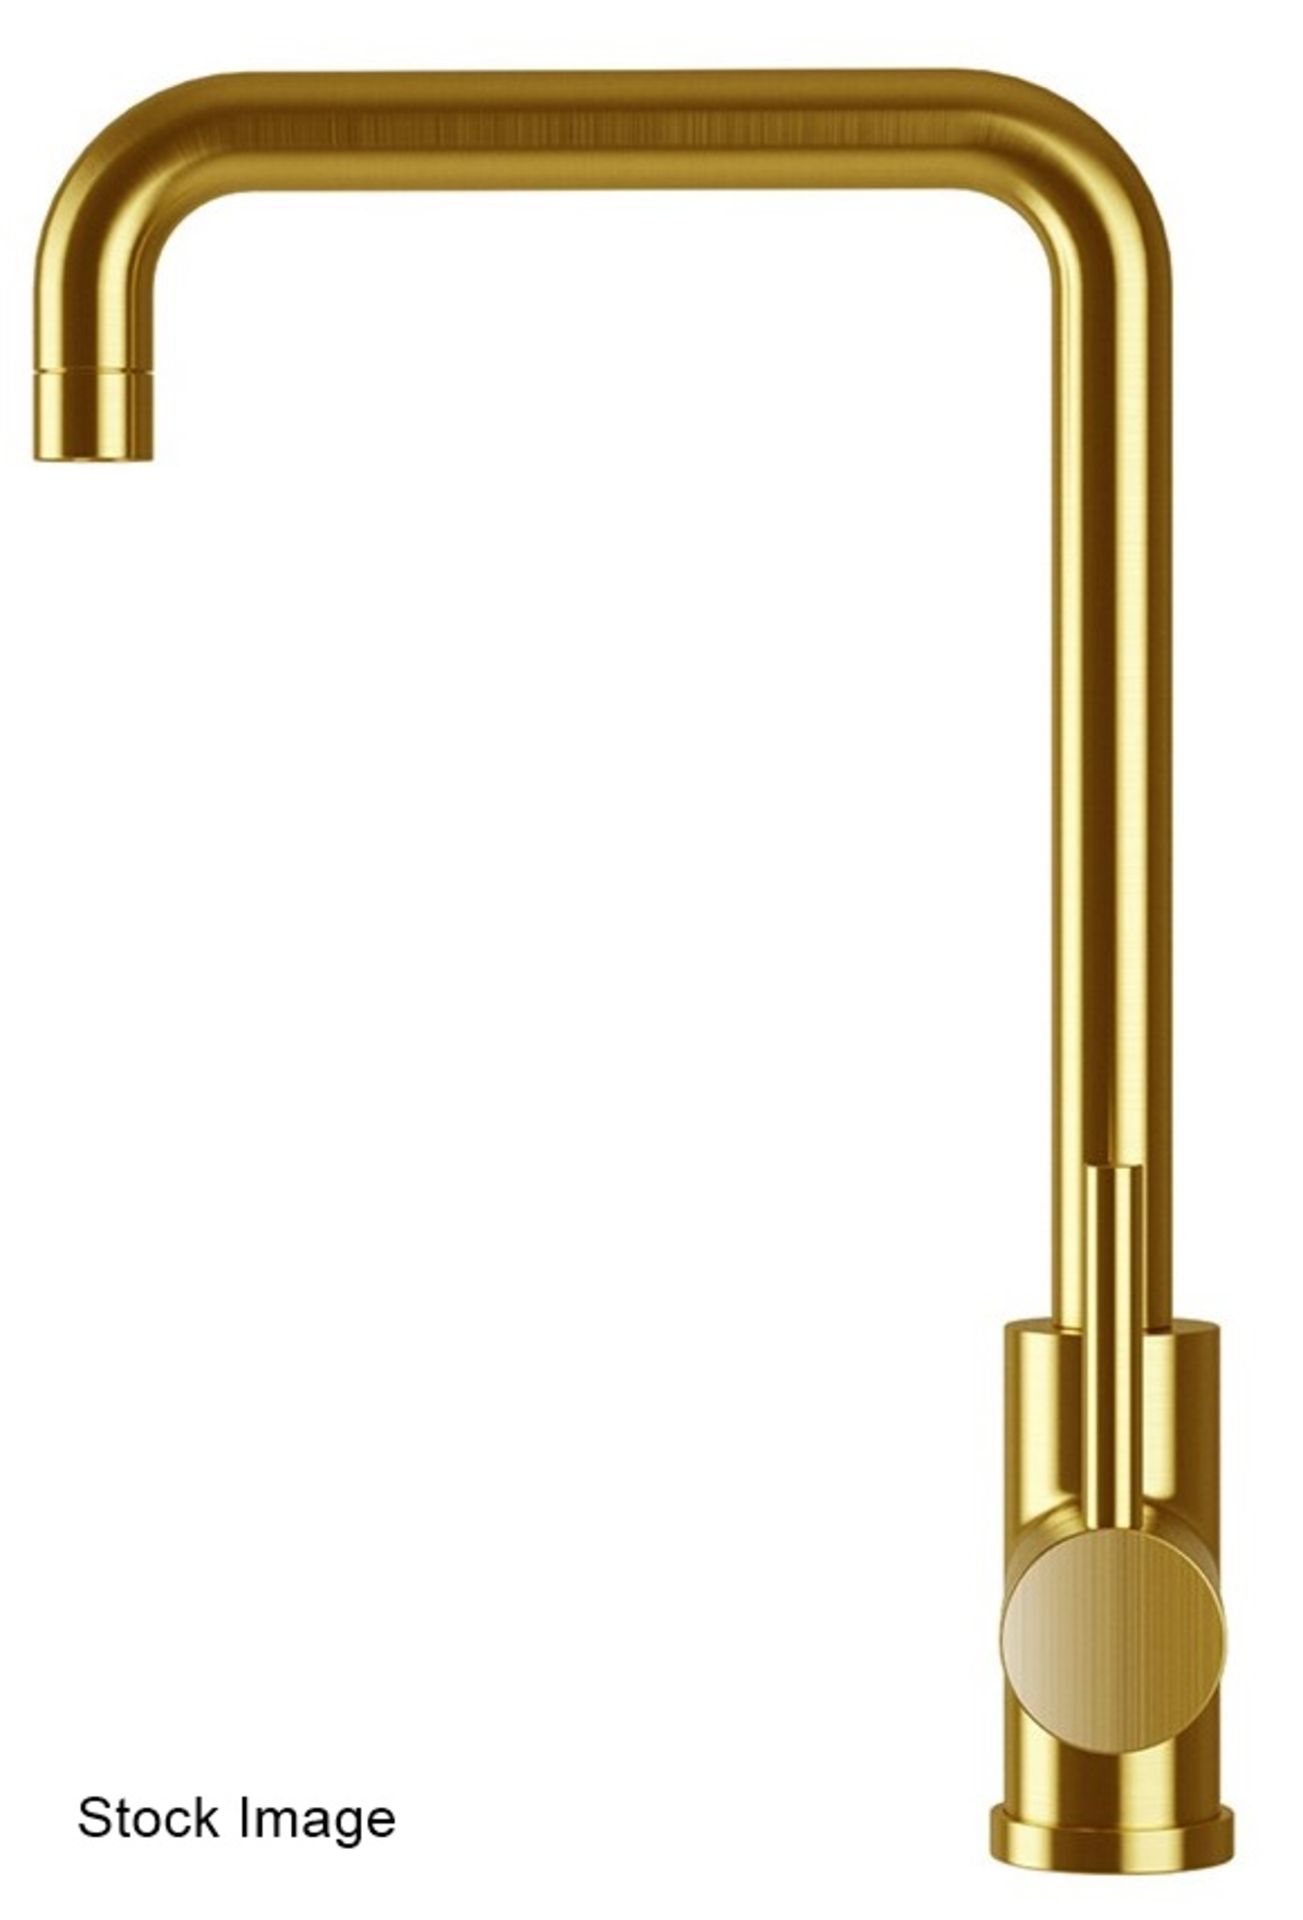 1 x CASSELLIE Brushed Gold Single Lever Mono Kitchen Sink Mixer Tap - Ref: KTA035 - New & Boxed - Image 2 of 3